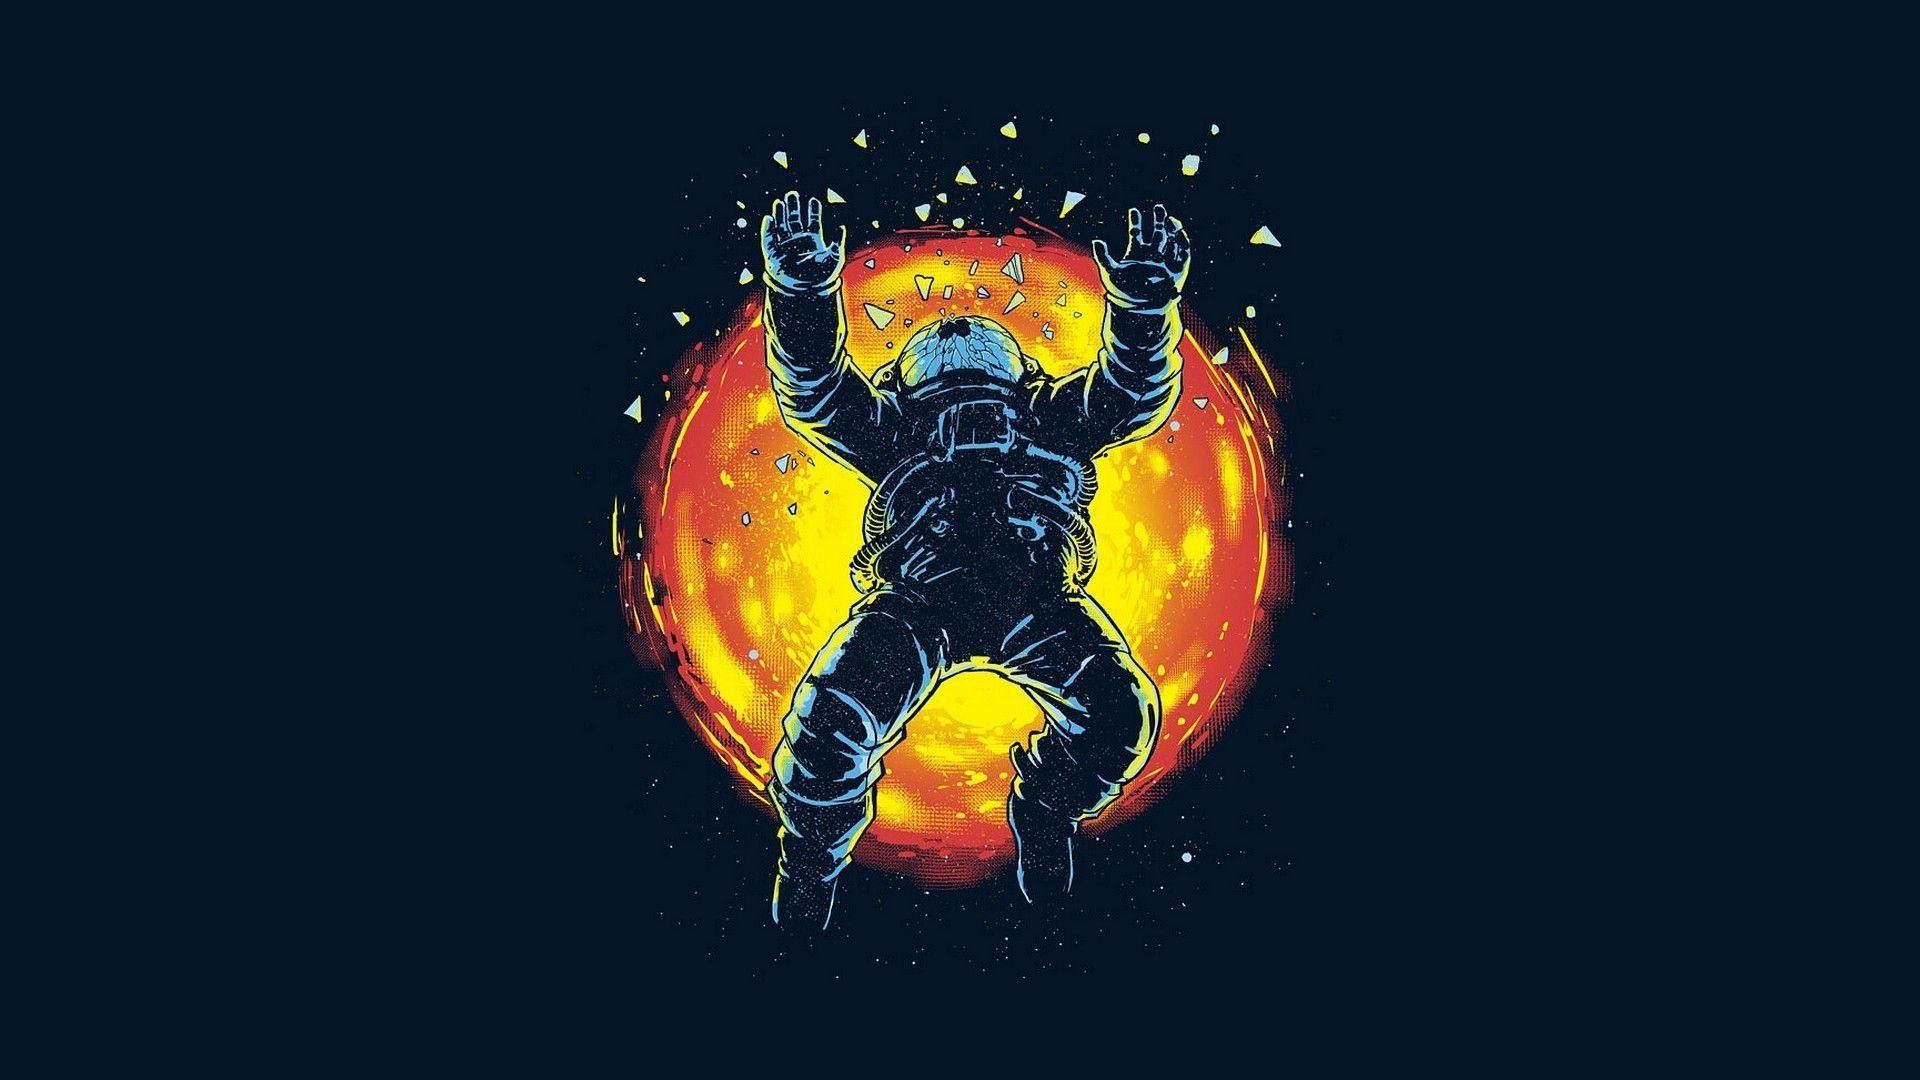 Awesome Astronaut Wallpaper.